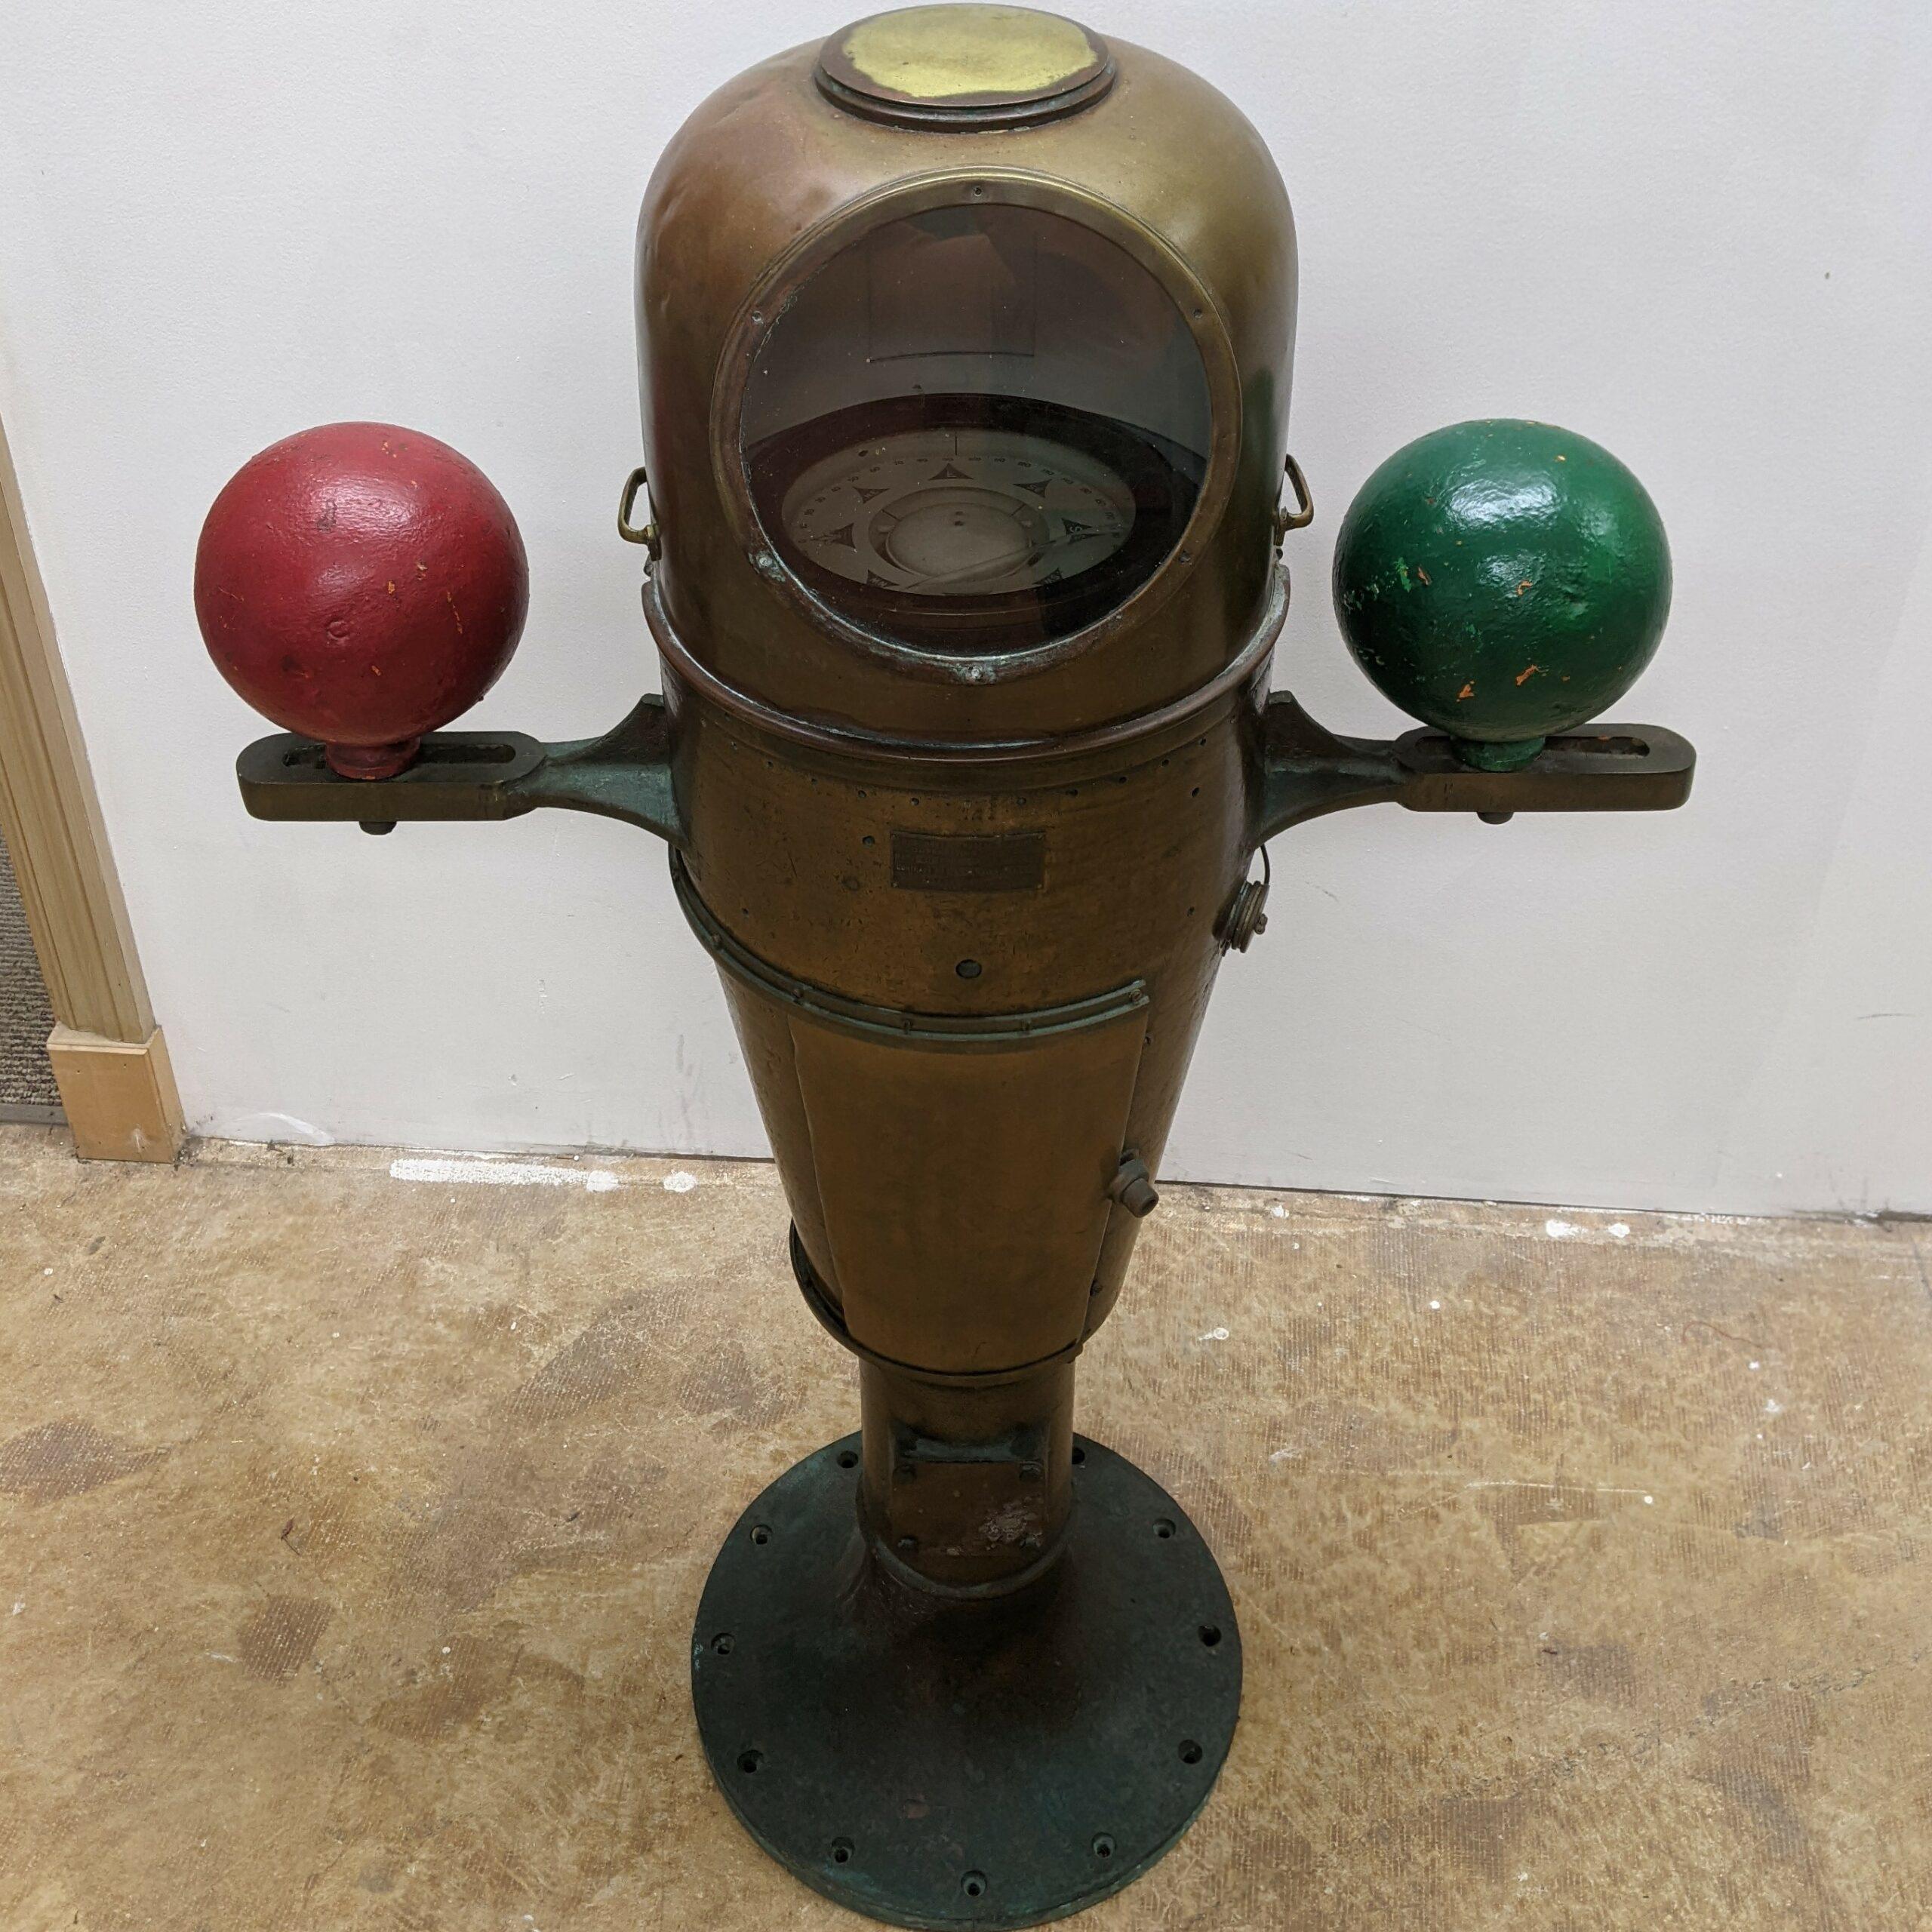 The Mark VII Mod 2 1942 US Navy Compensating Binnacle is a rare and unique item with a rich history. It was originally used on a Victory Class ship, a type of cargo ship commissioned by the United States Maritime Commission during World War II to